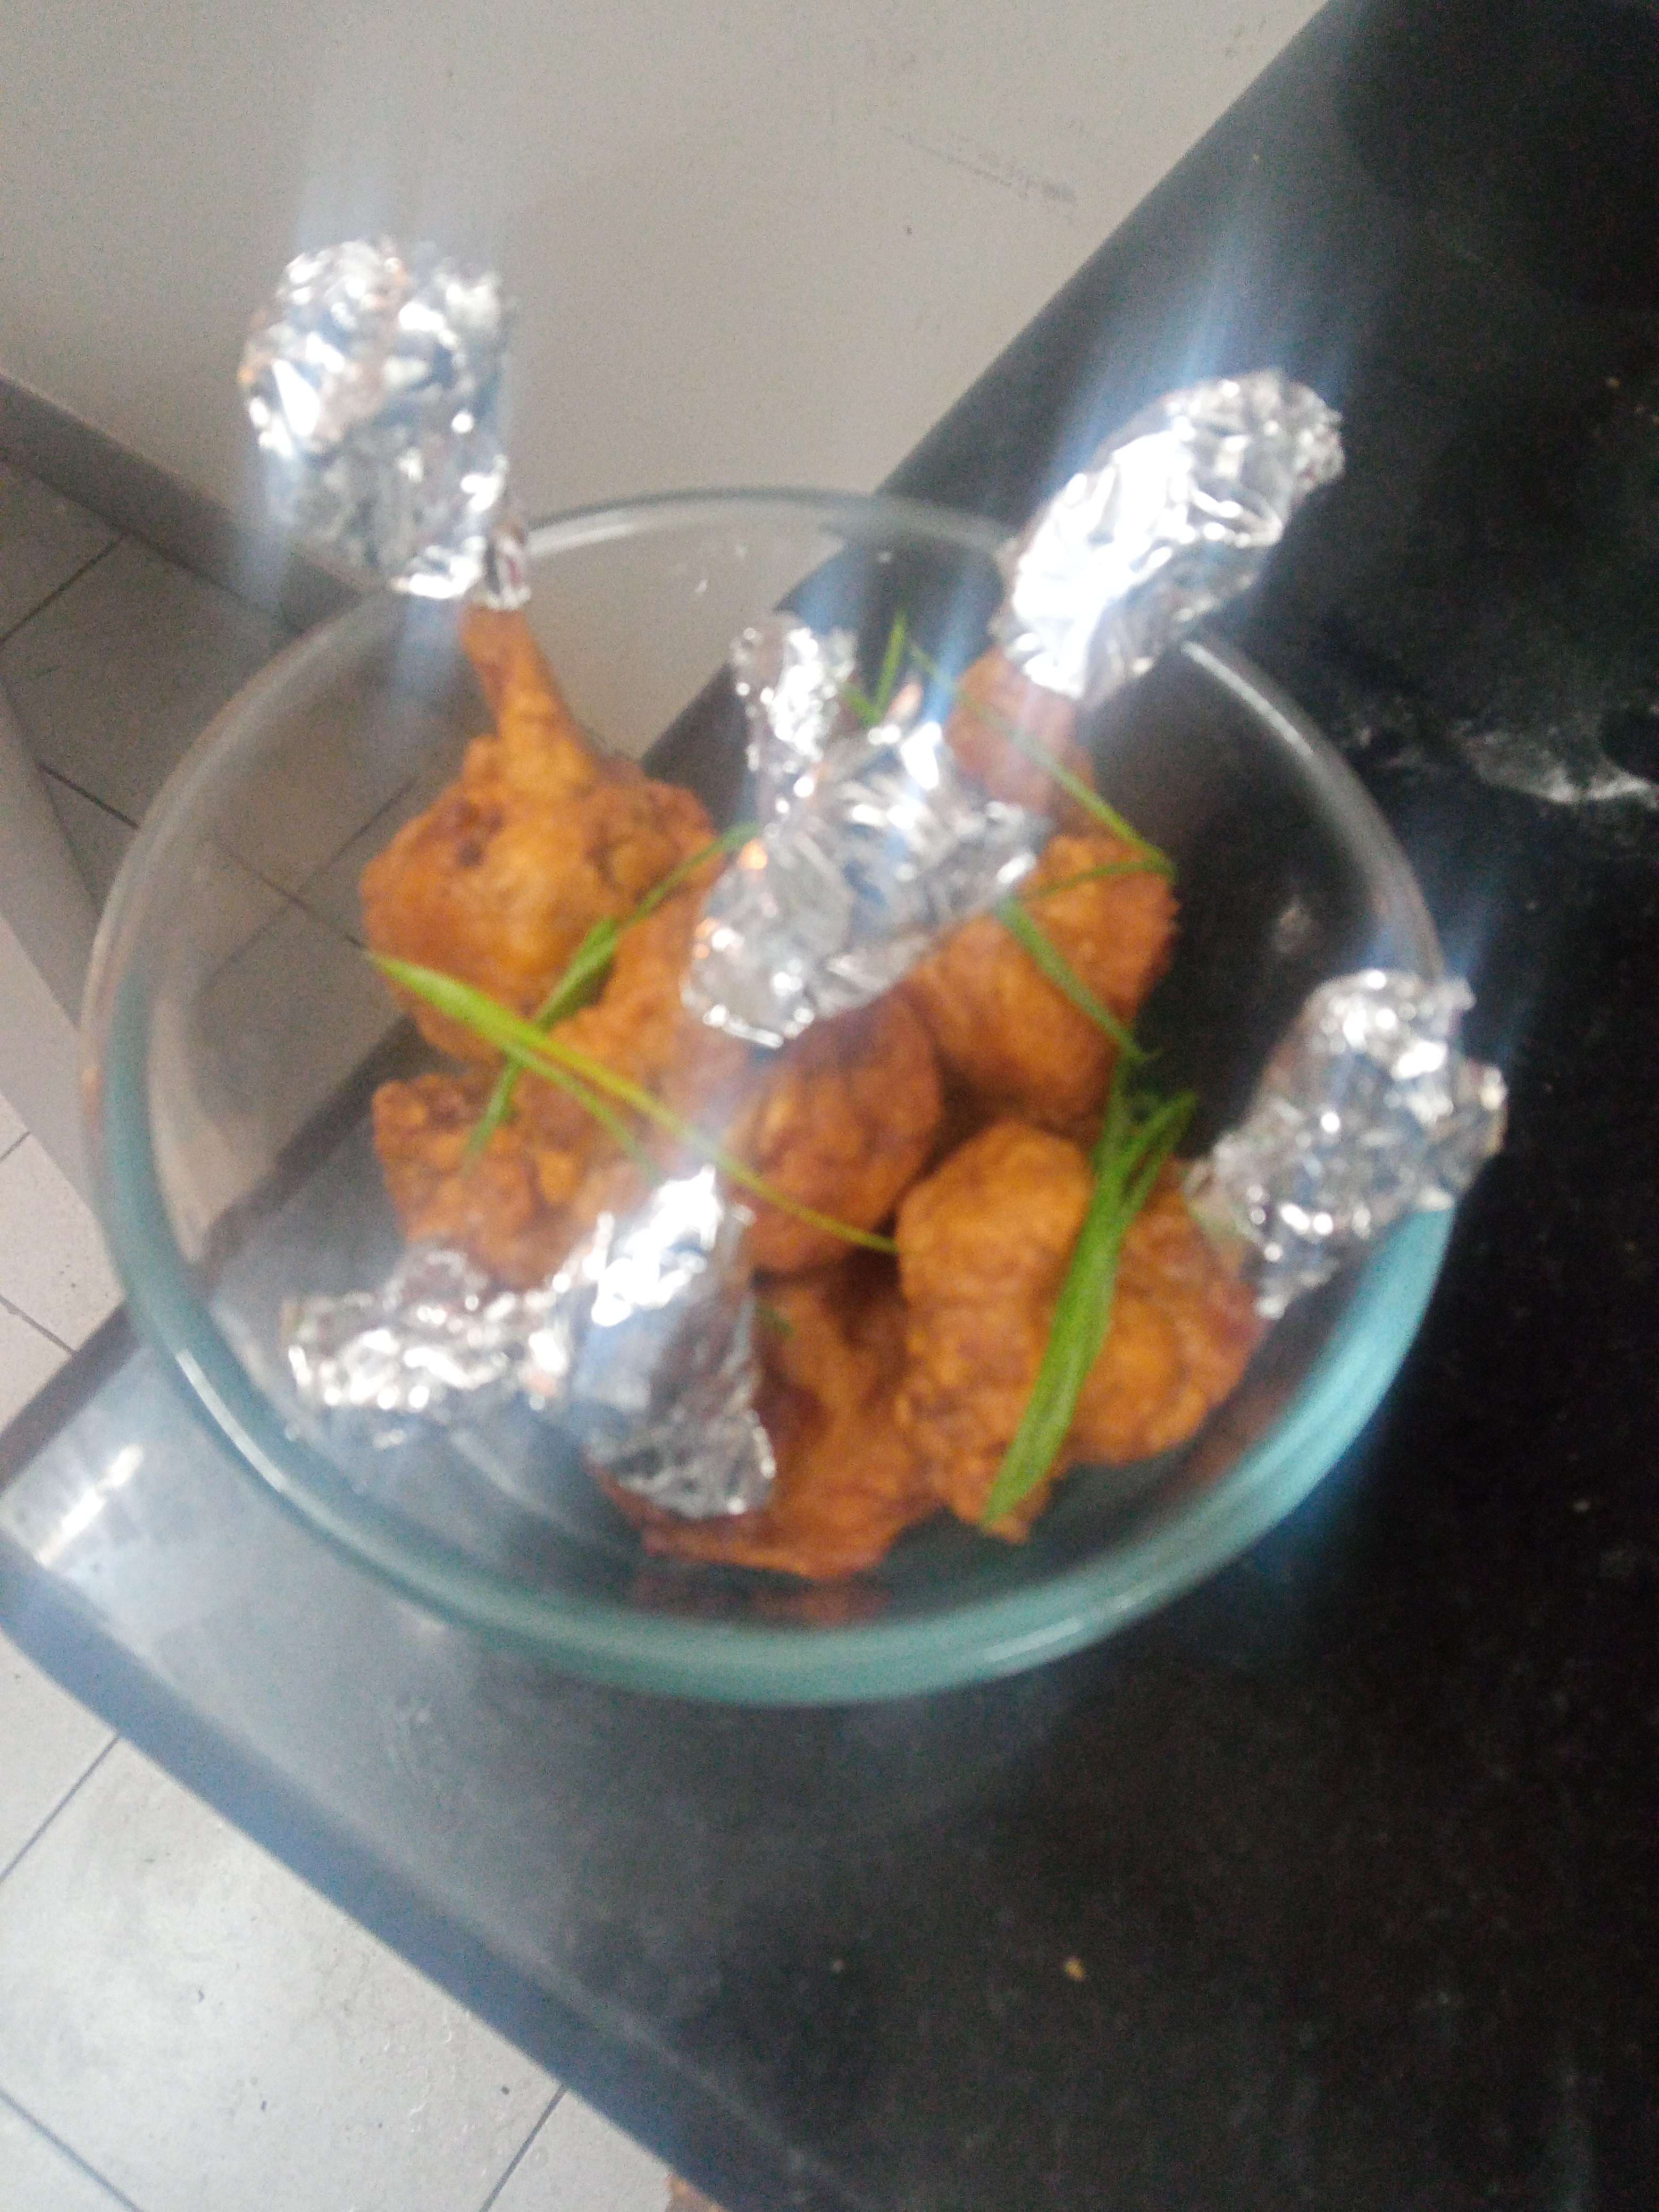 Tasty Chicken Lollipop cooked by COOX chefs cooks during occasions parties events at home